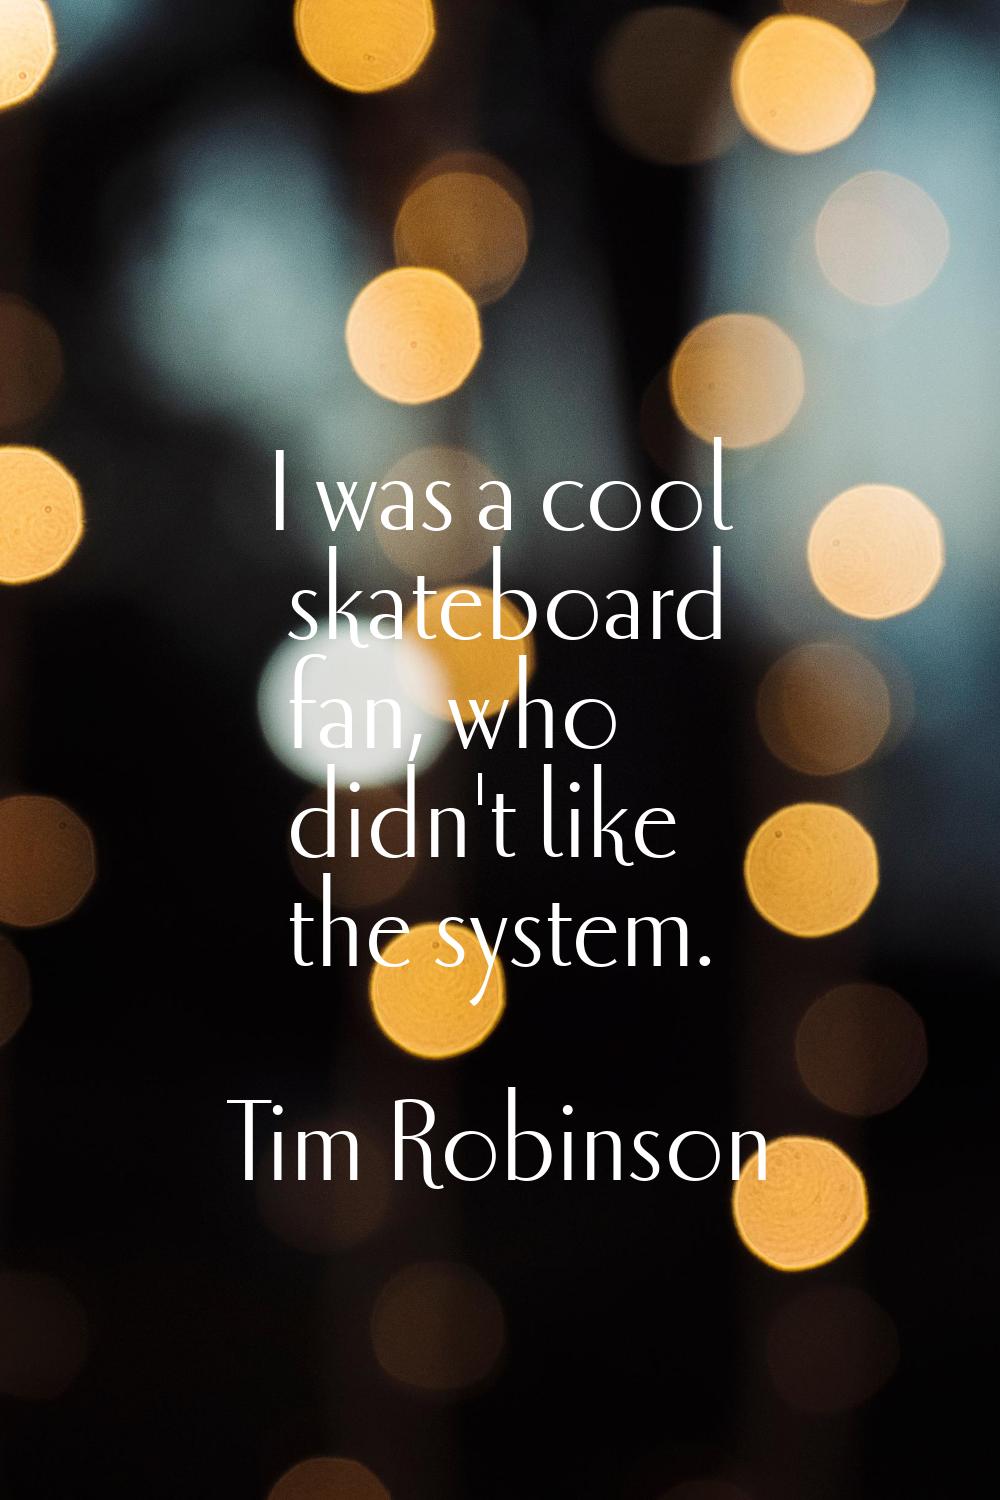 I was a cool skateboard fan, who didn't like the system.